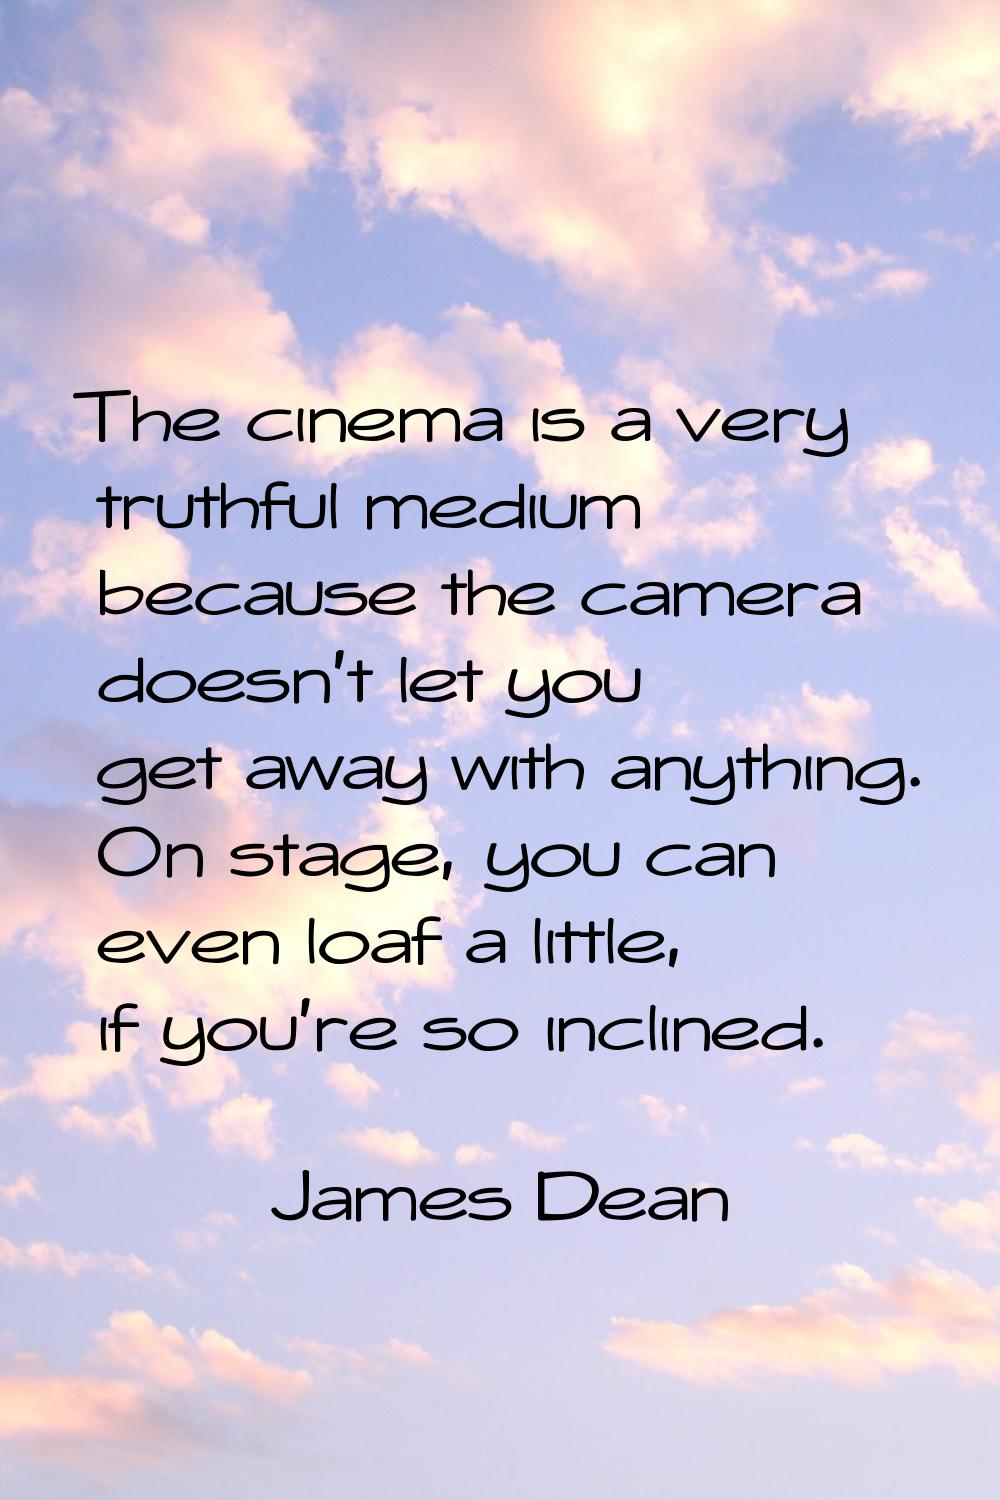 The cinema is a very truthful medium because the camera doesn't let you get away with anything. On 